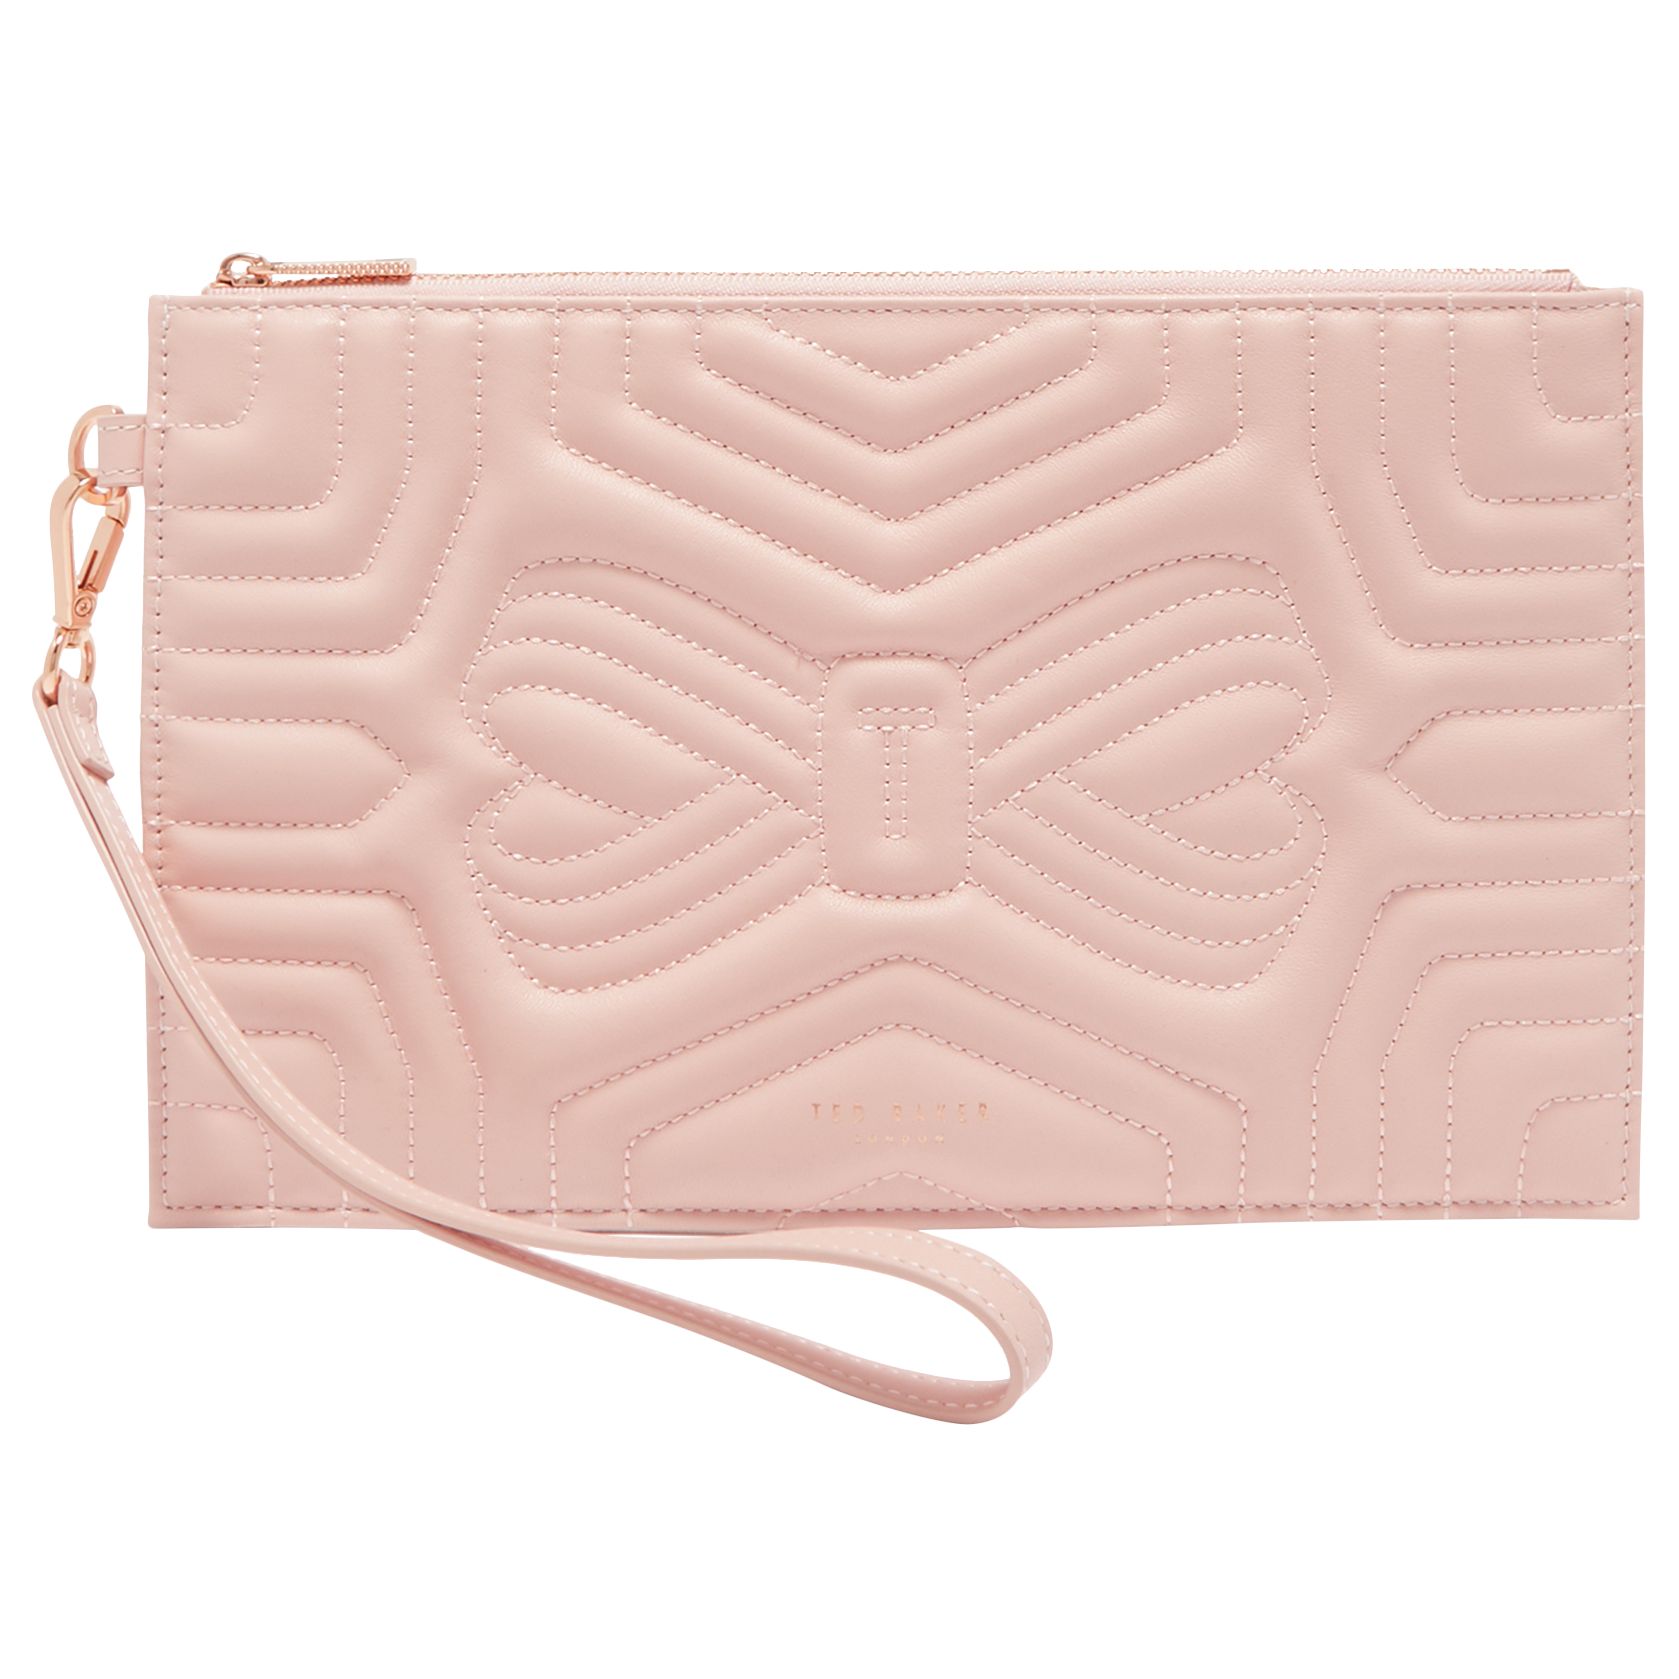 Ted Baker Verda Quilted Leather Wristlet Pouch Review